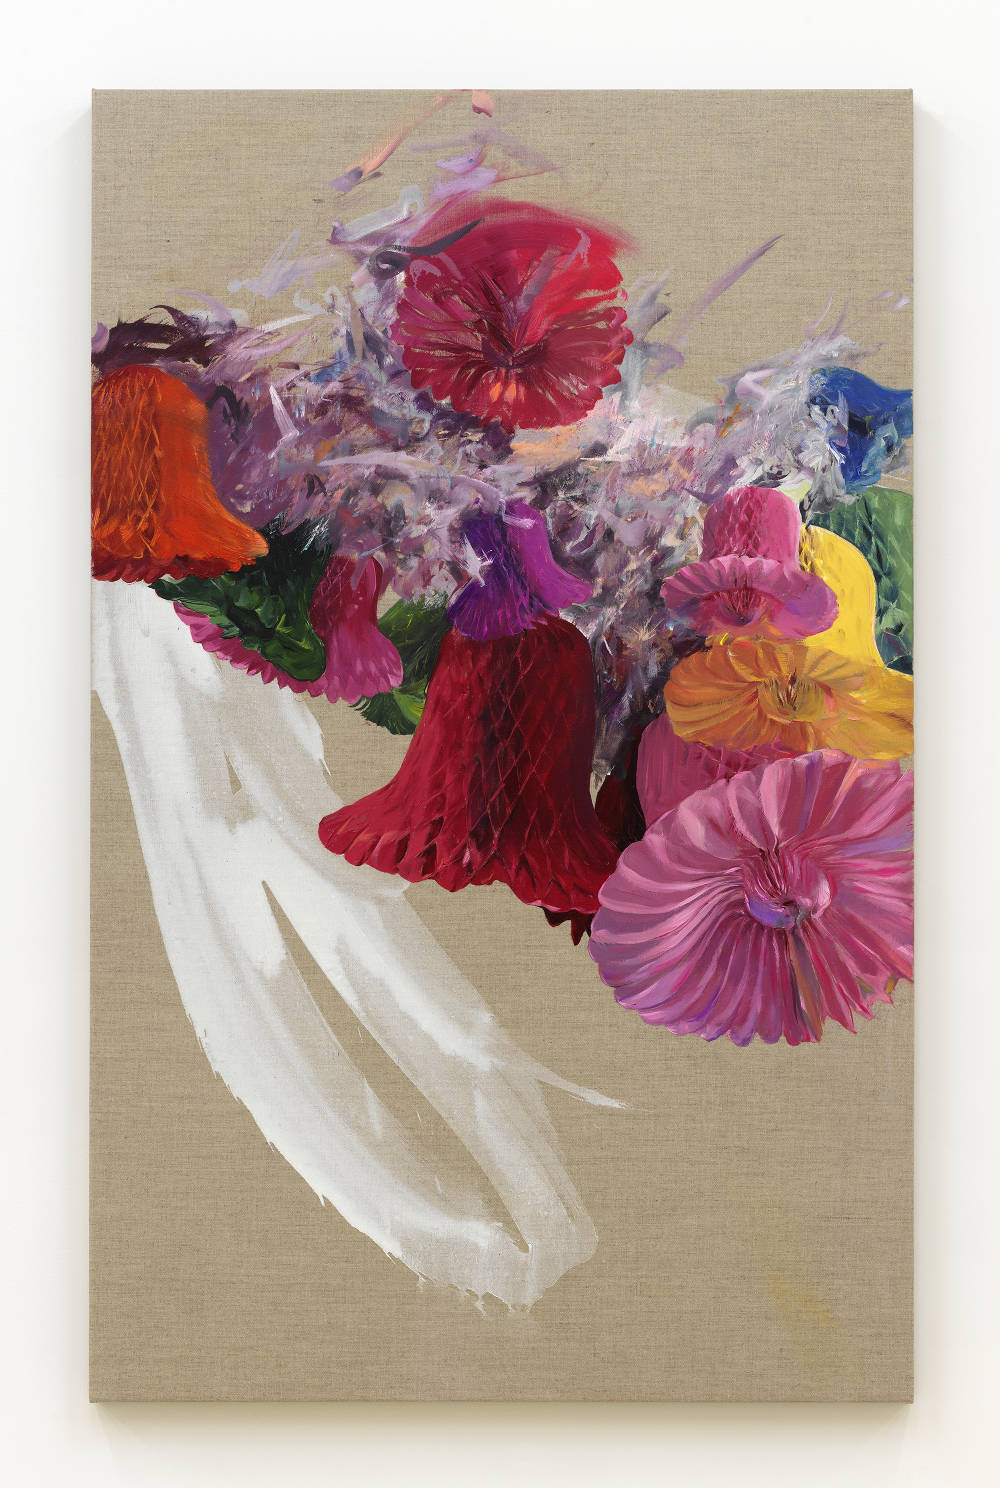 A vertical painting depicting numerous bell shaped flowers in a range of bright pinks, reds, yellows, and blues. There is a large gestural mark in the white. The ground of the painting is raw canvas. 